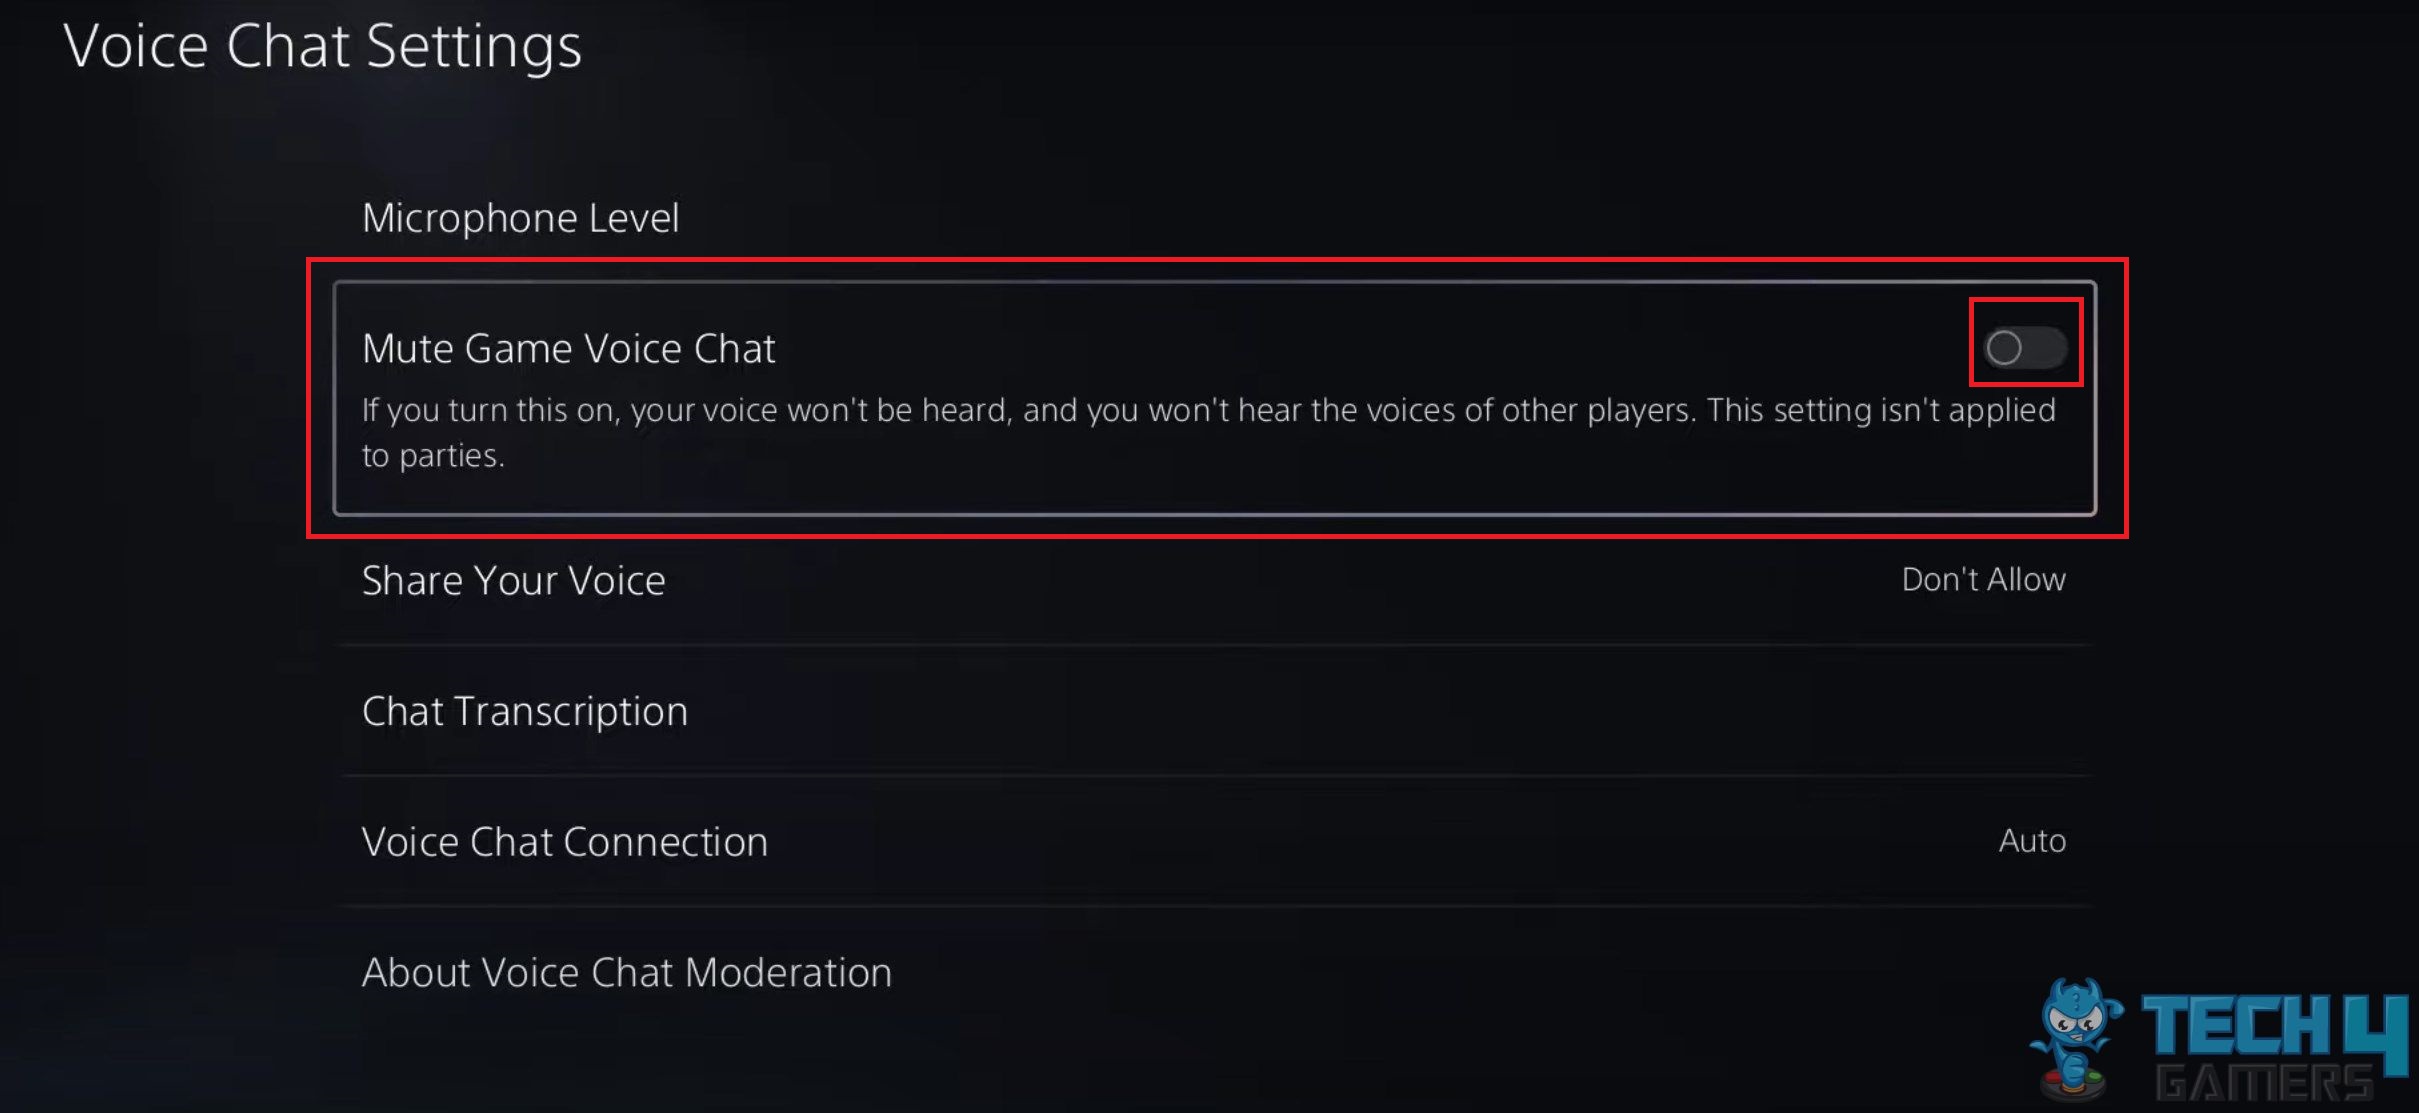 Mute Game Voice Chat option